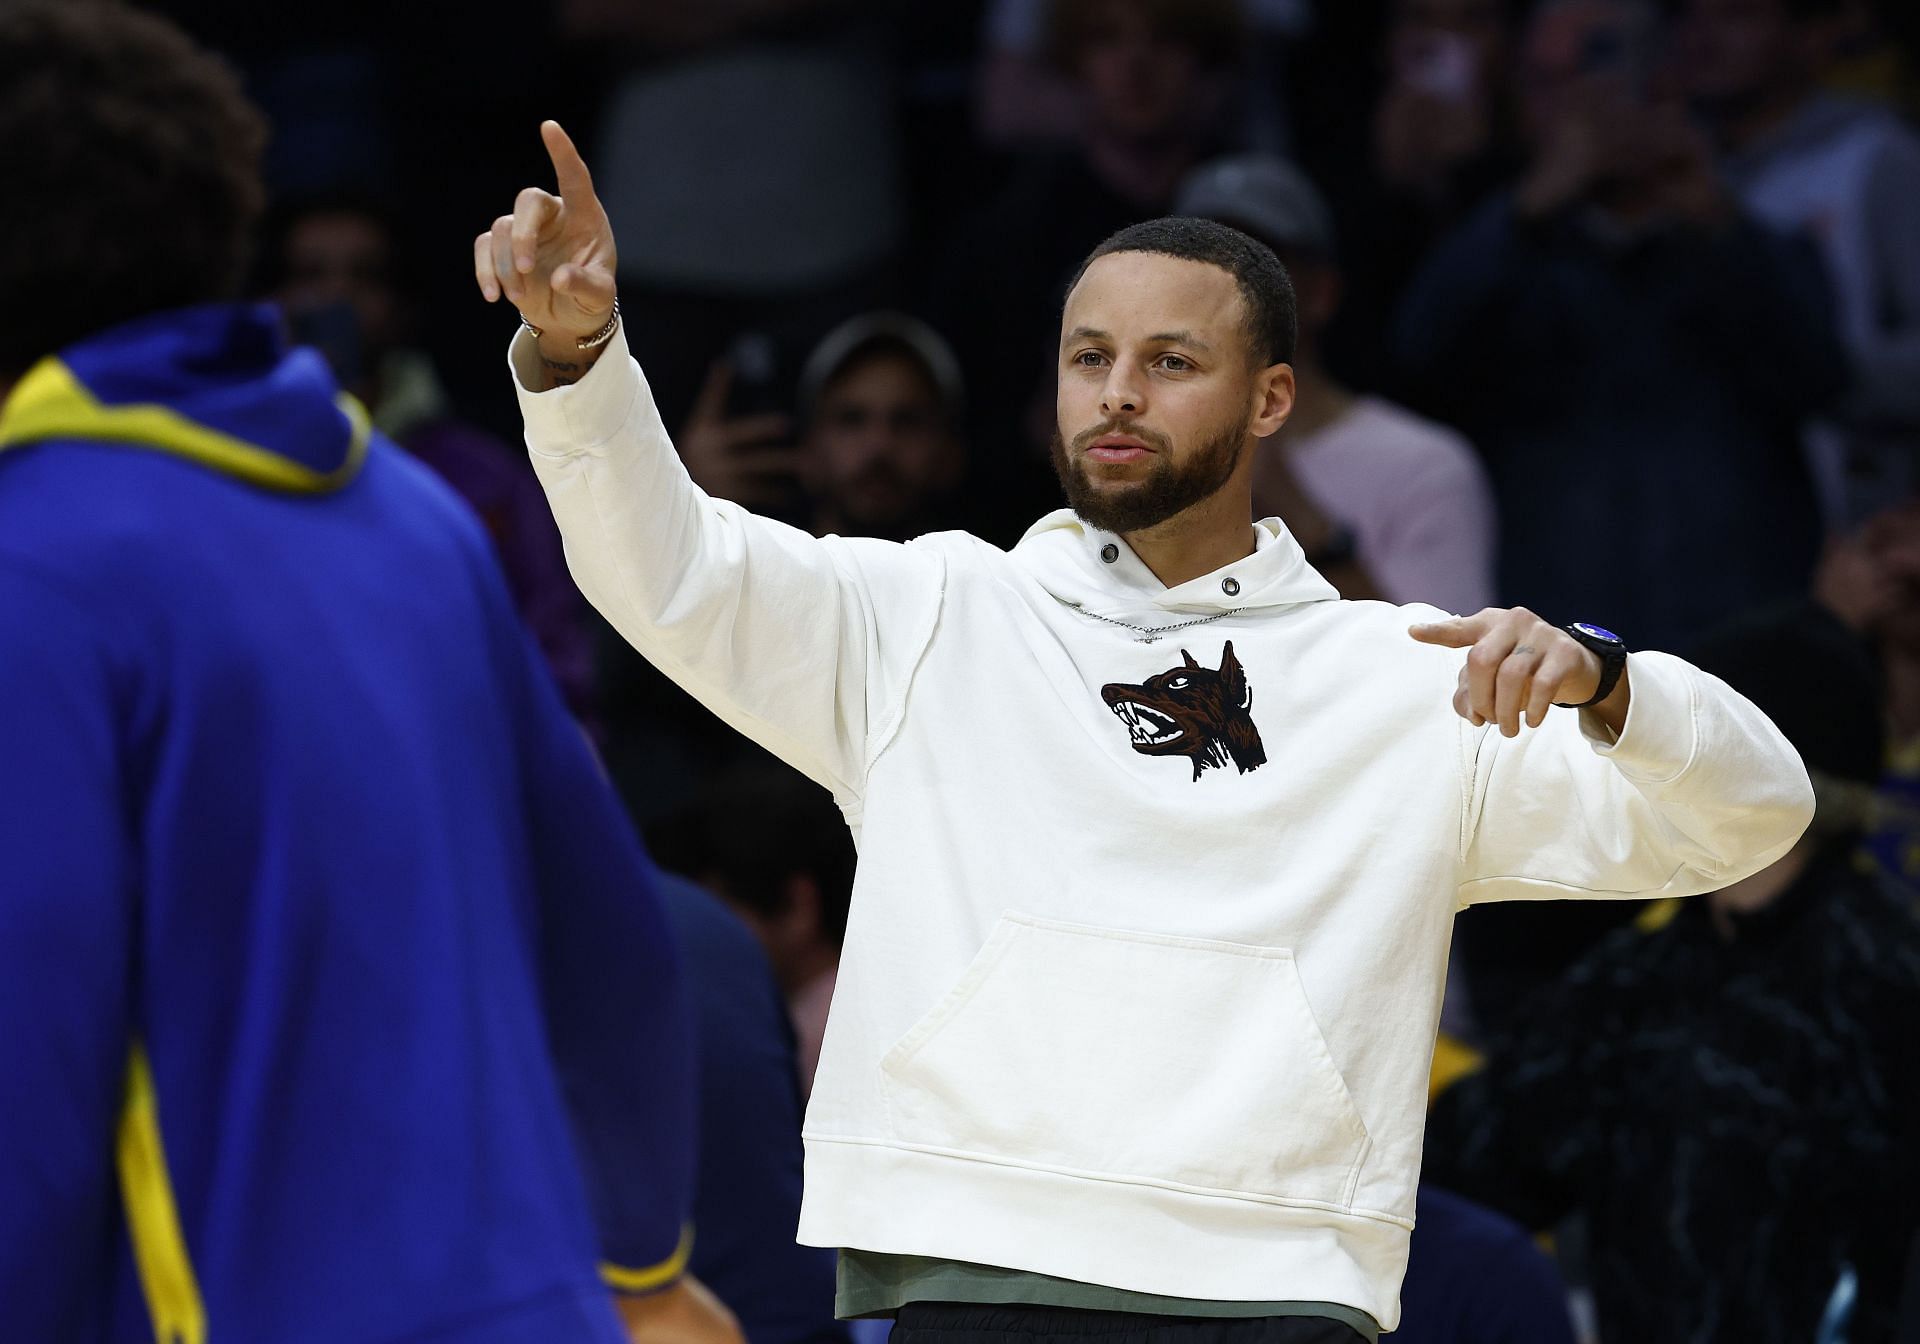 Injuries derailed what could have been an MVP-level season for Steph Curry.